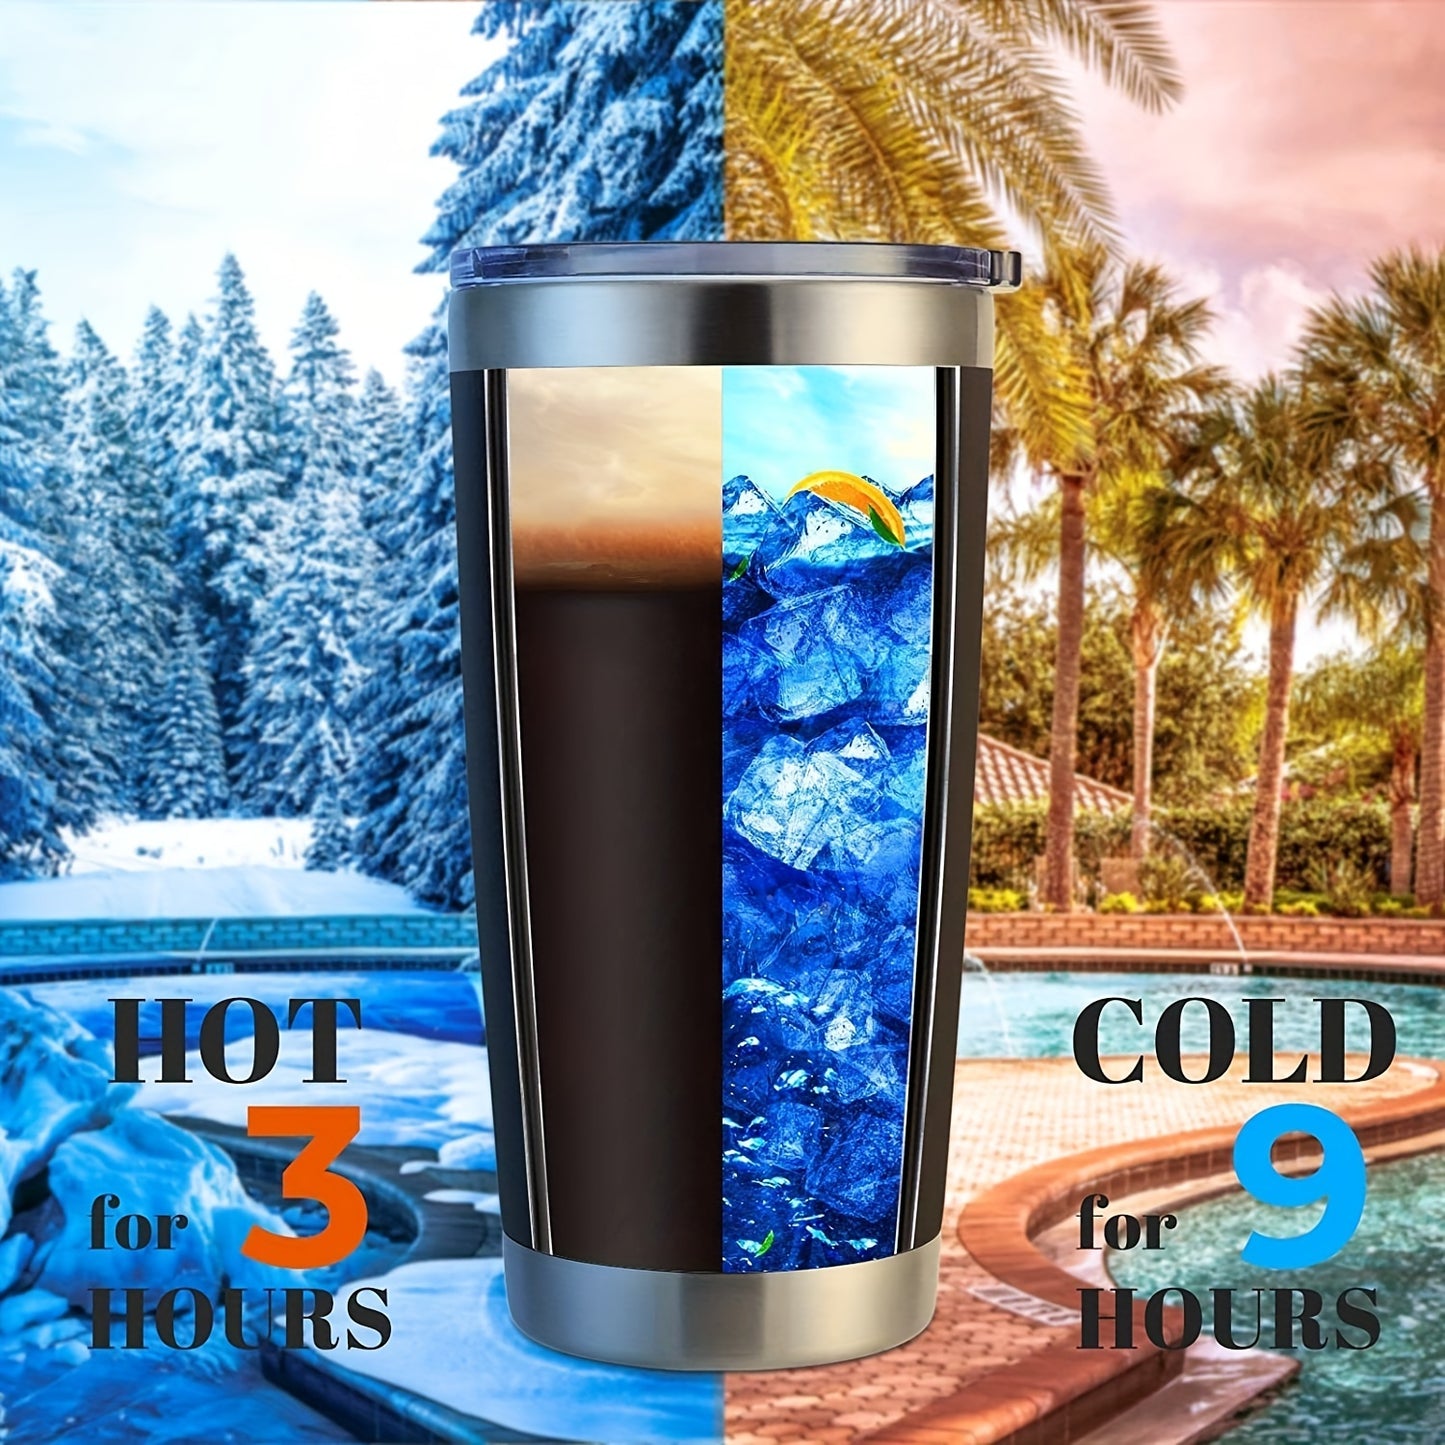 1pc, Coffee Tumbler, 500ml\u002F17oz Colored Coffee Mugs, Stainless Steel Insulated Water Cups, For Hot And Cold Beverages, Summer Drinkware, Kitchen Stuff, Home Kitchen Items, Birthday Gifts